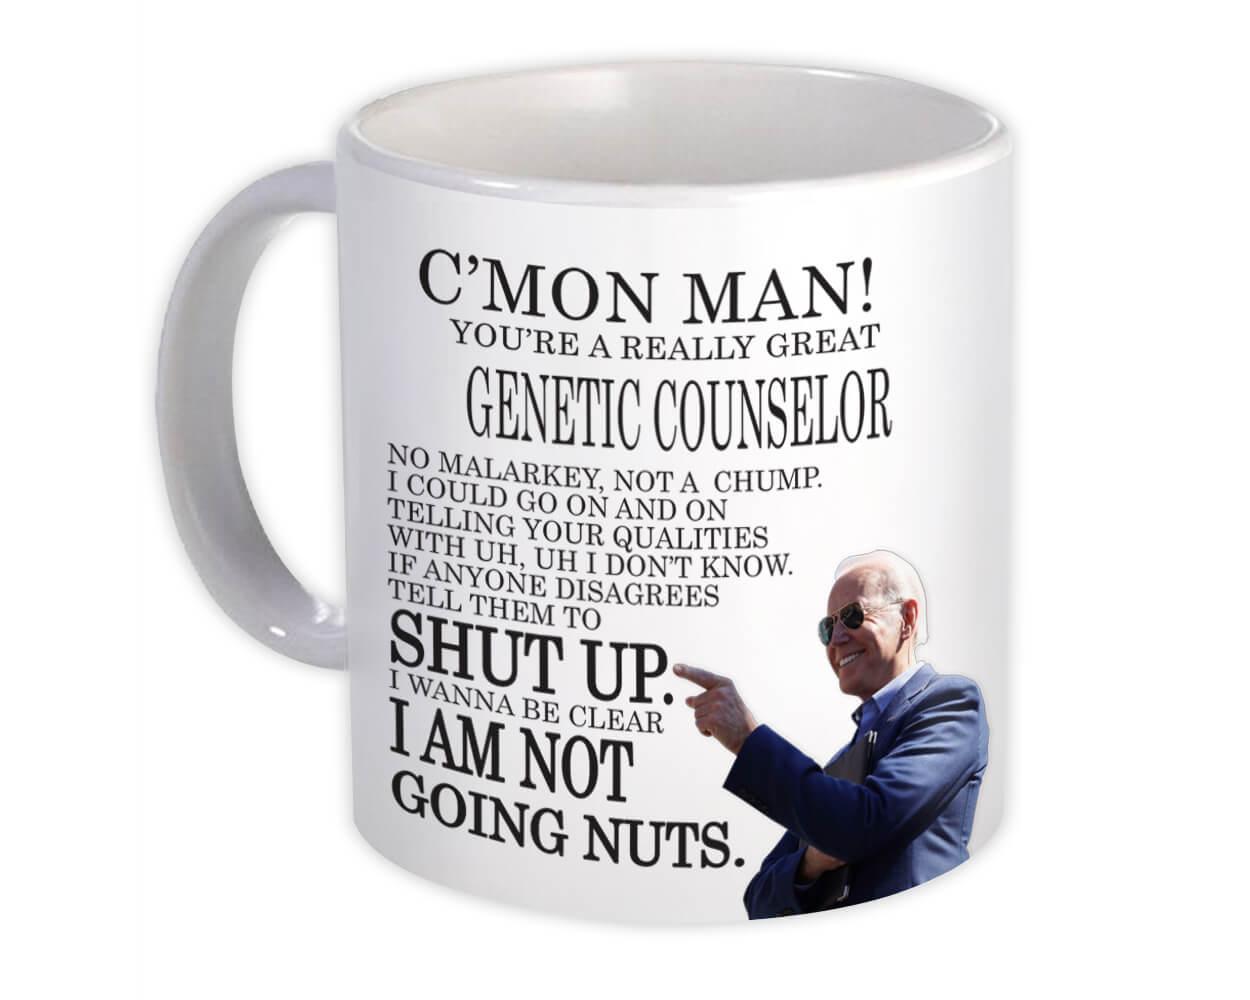 Details about   Gift for GENETIC COUNSELOR Joe Biden Gift Mug Best GENETIC COUNSELOR Gag Great